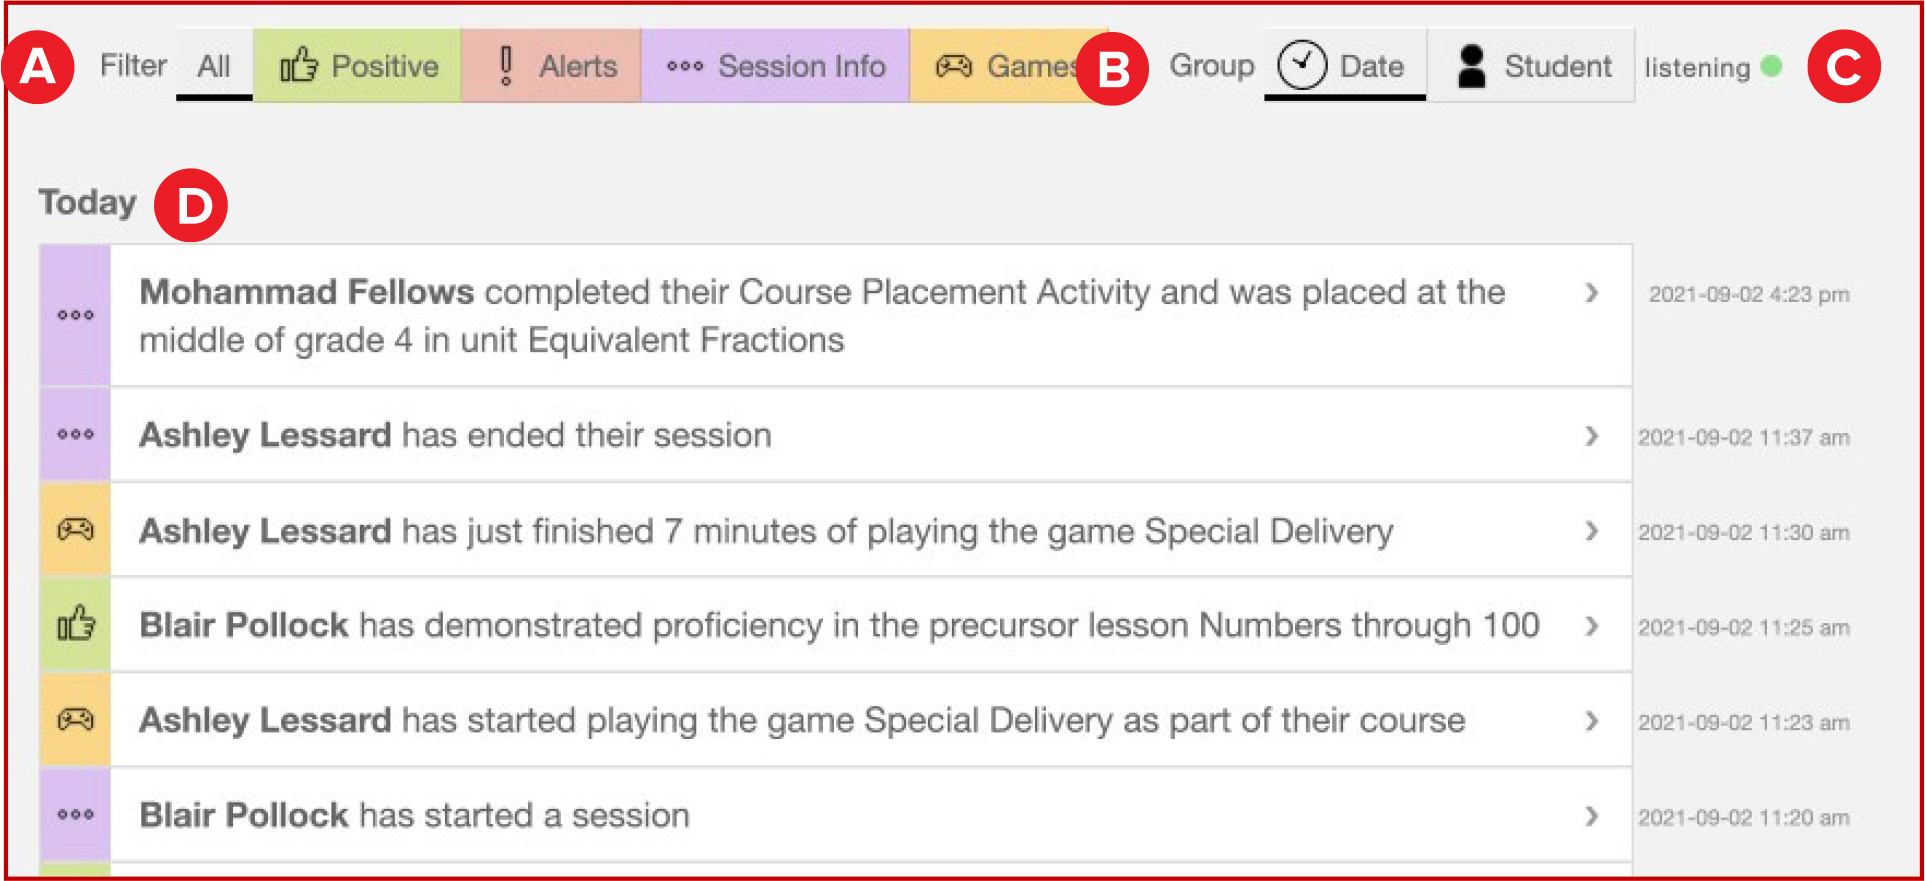 News feed screenshot showing what student started and ended activiites as well as placement in activities